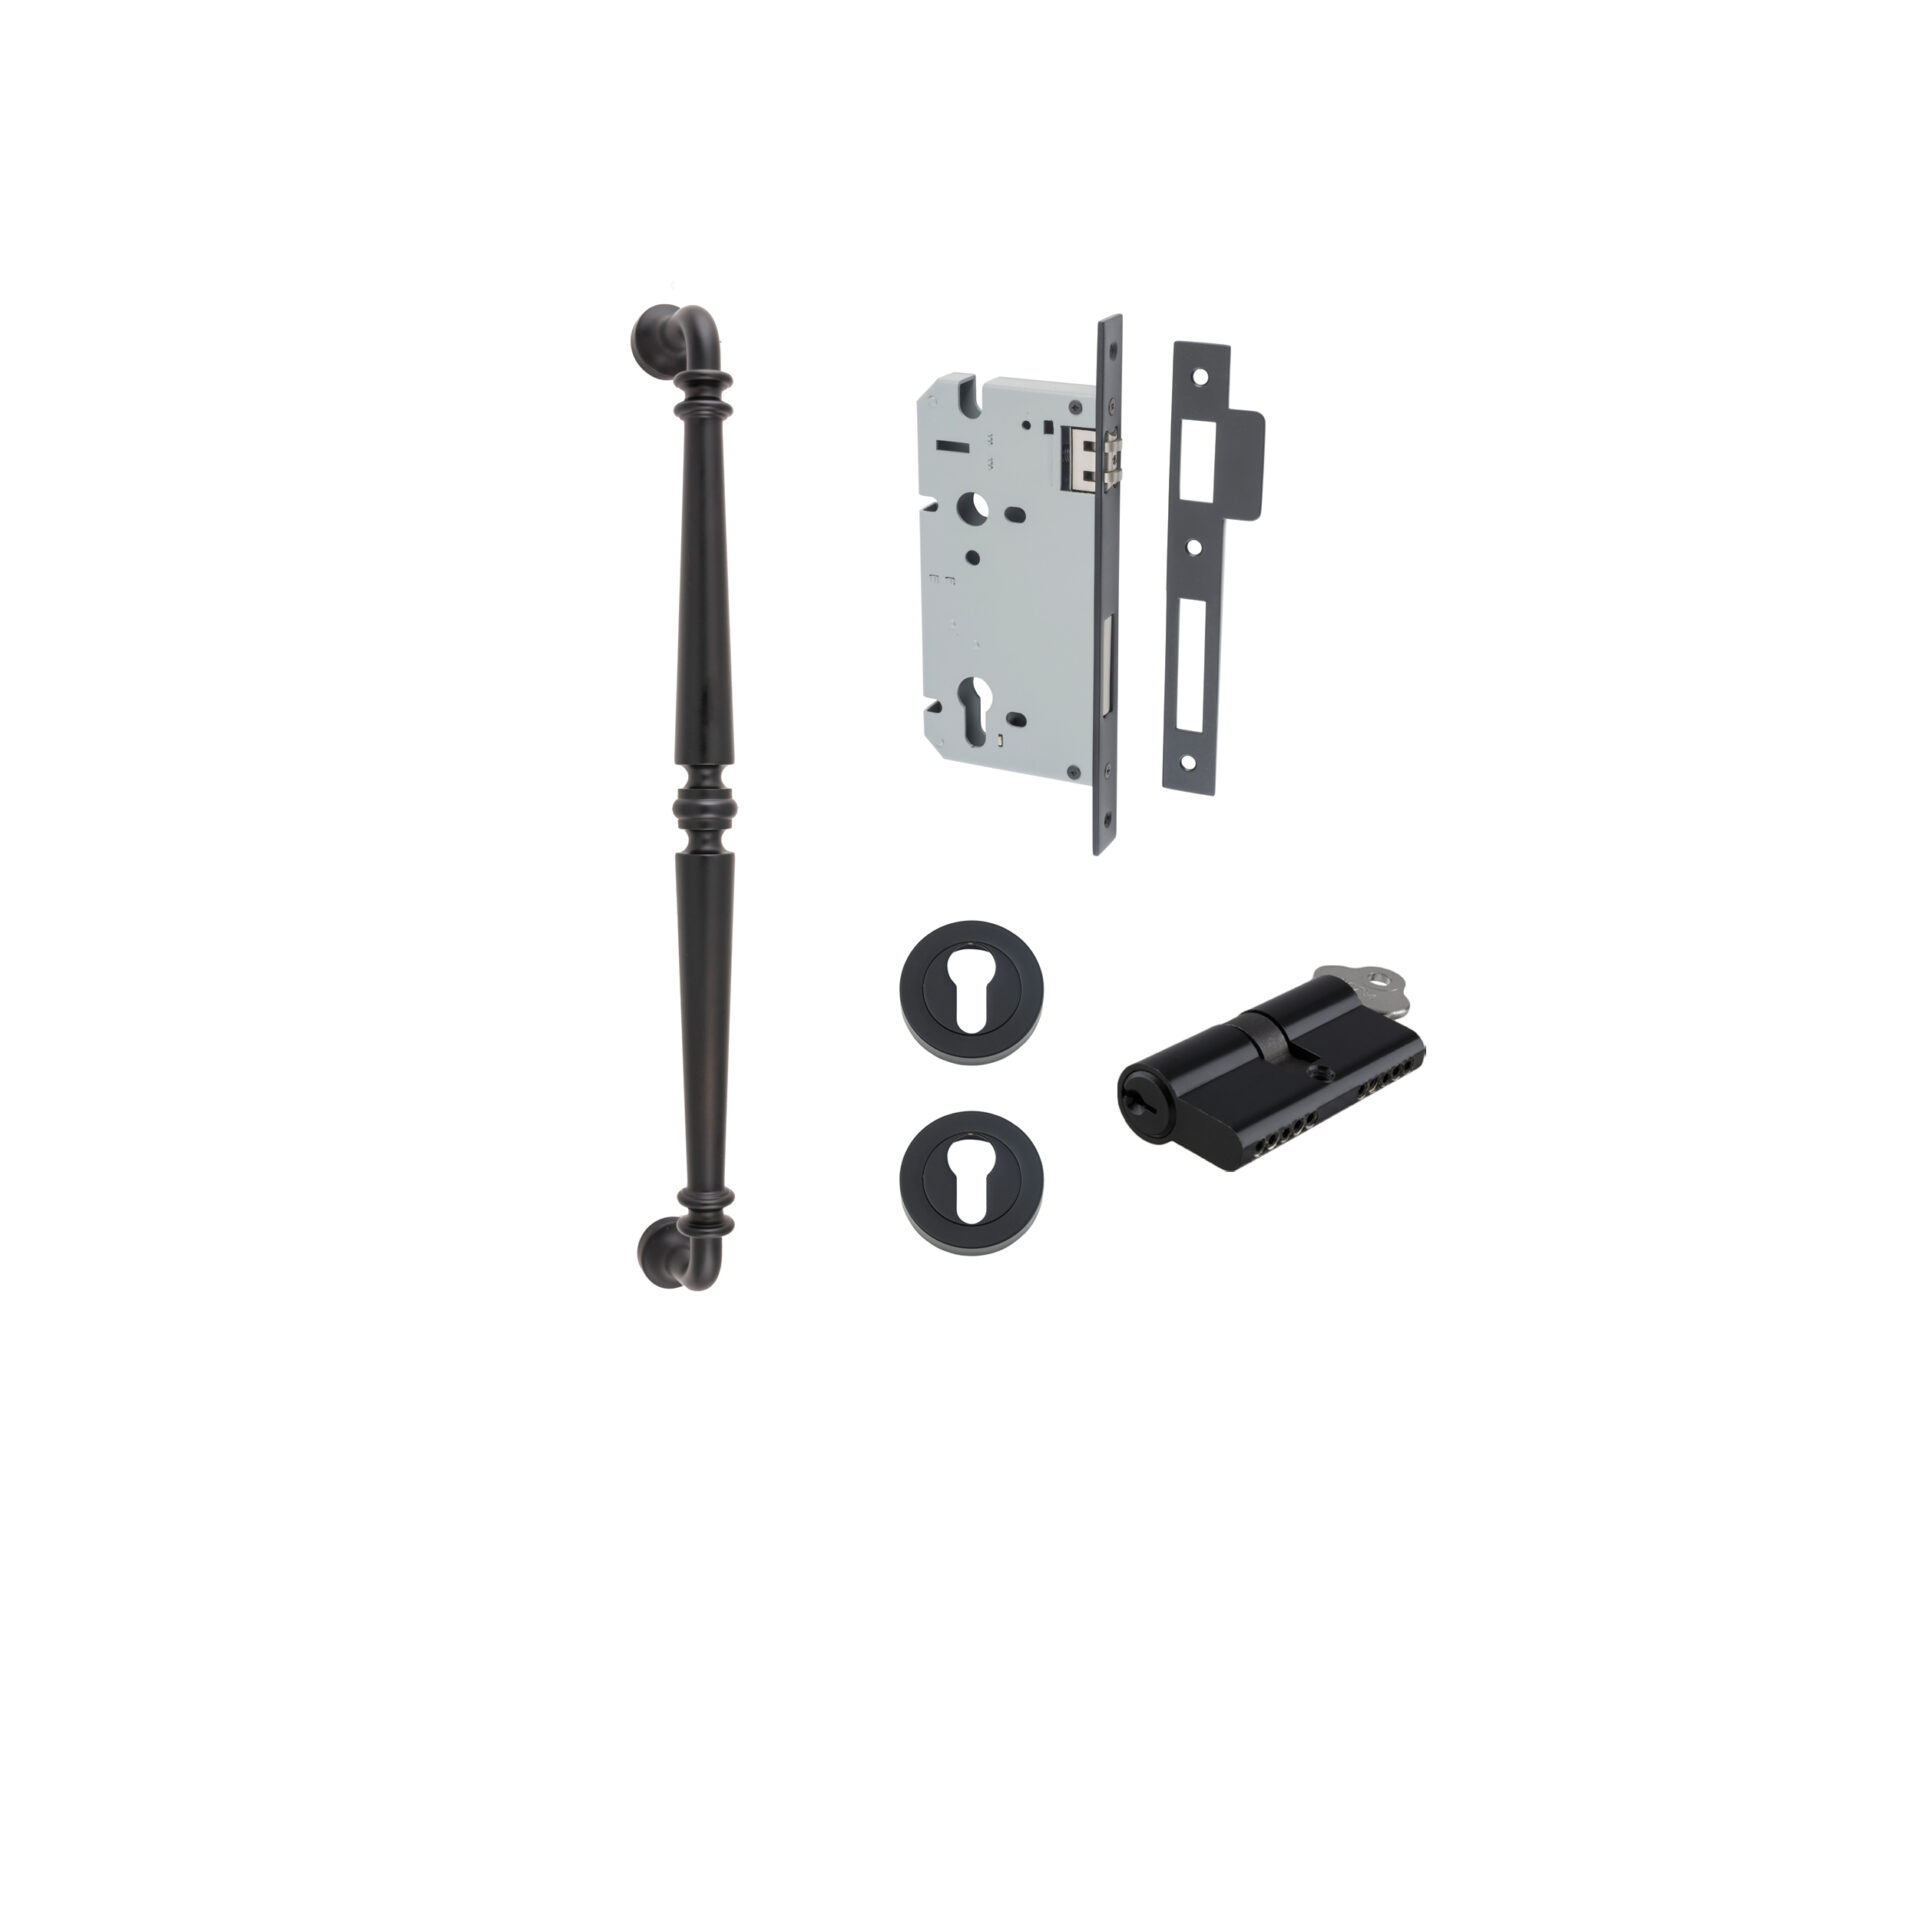 Sarlat Pull Handle - 450mm Entrance Kit with Separate High Security Lock